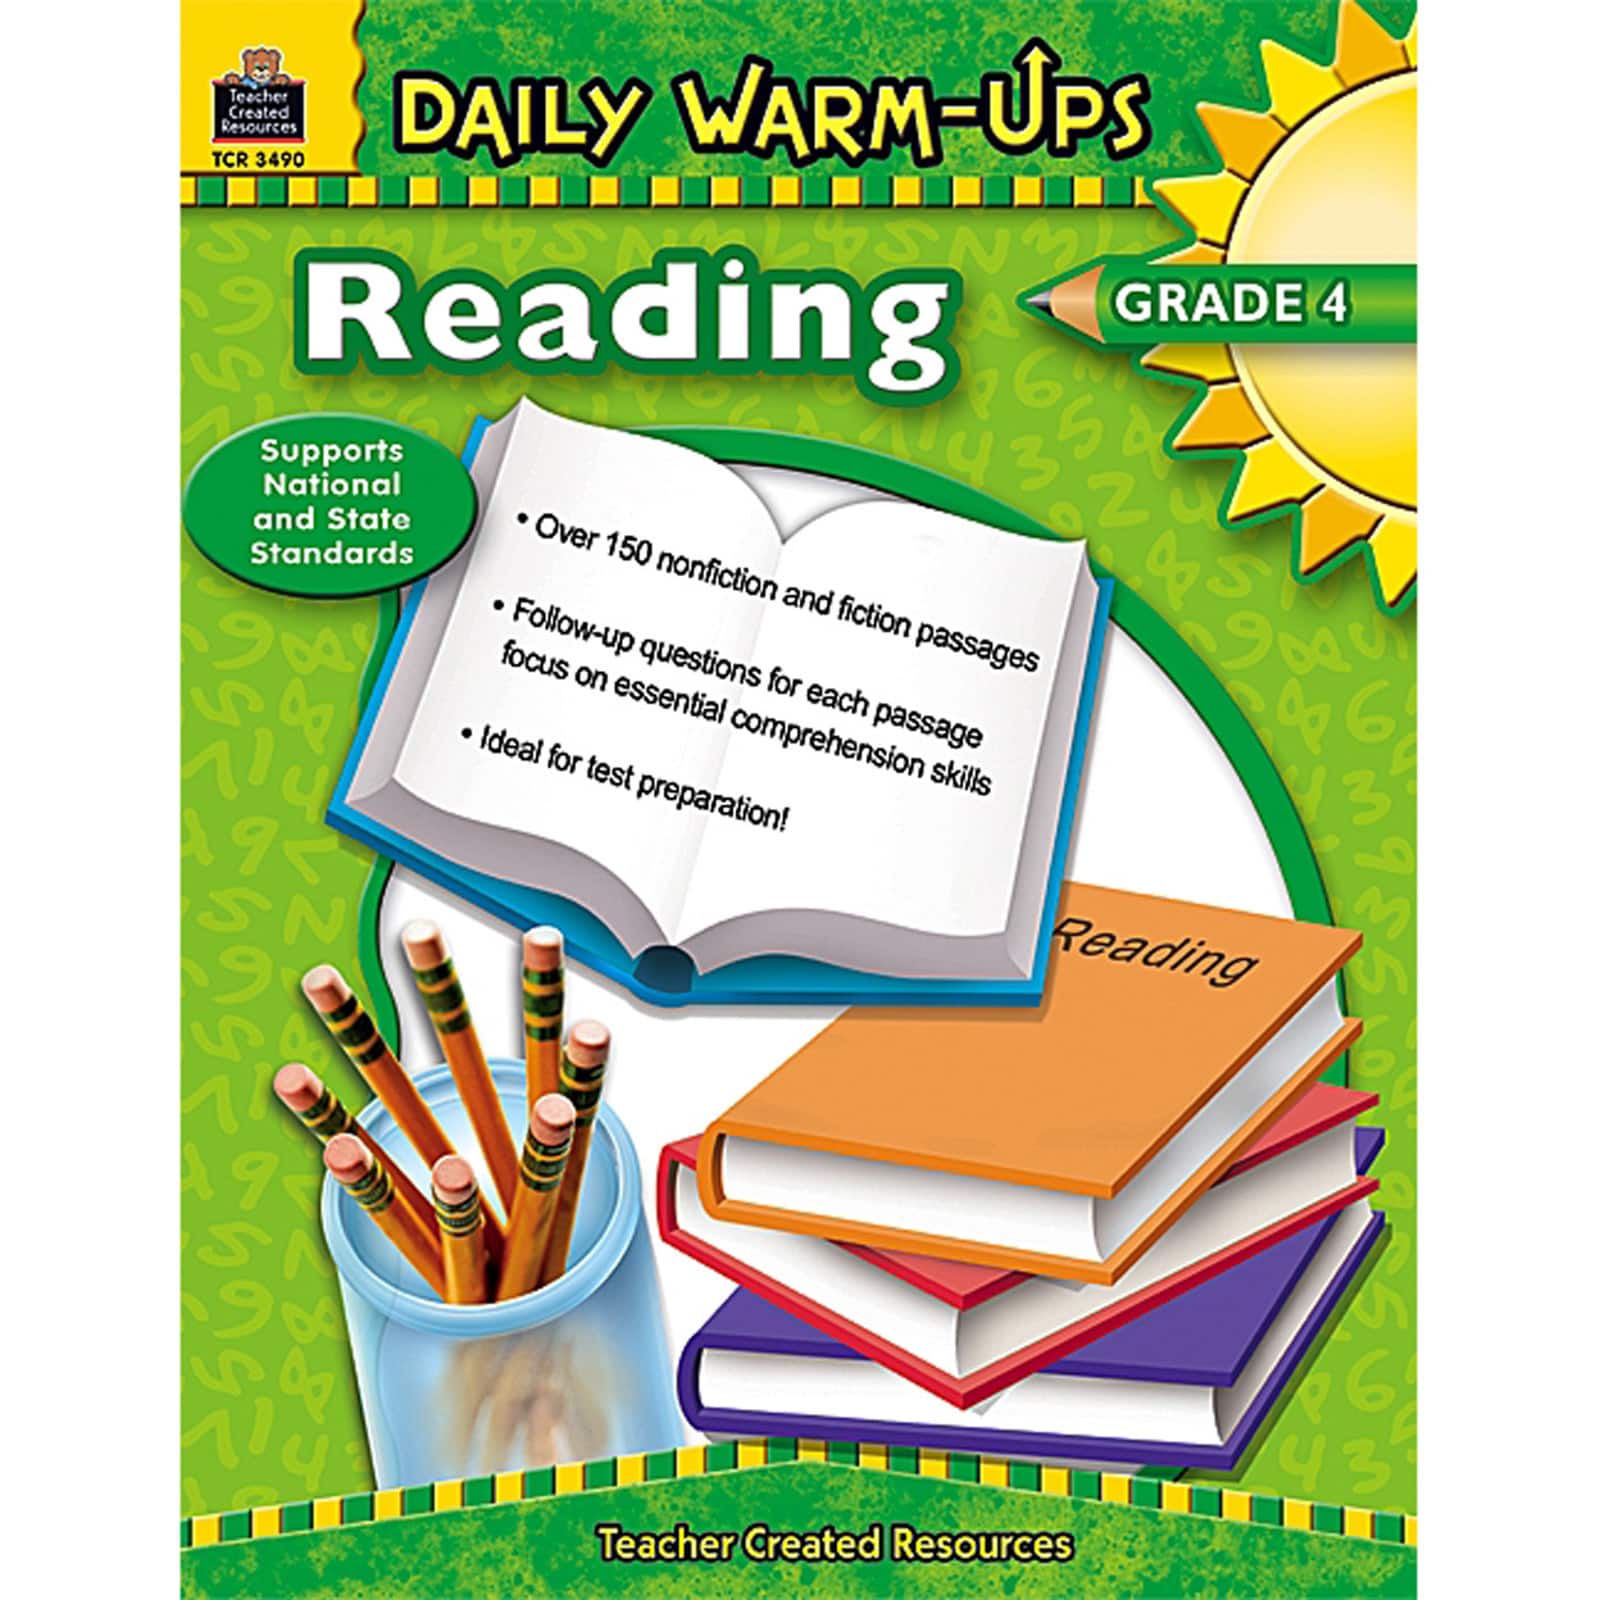 Teacher Created Resources Daily Warm-Ups: Reading Book, Grade 4